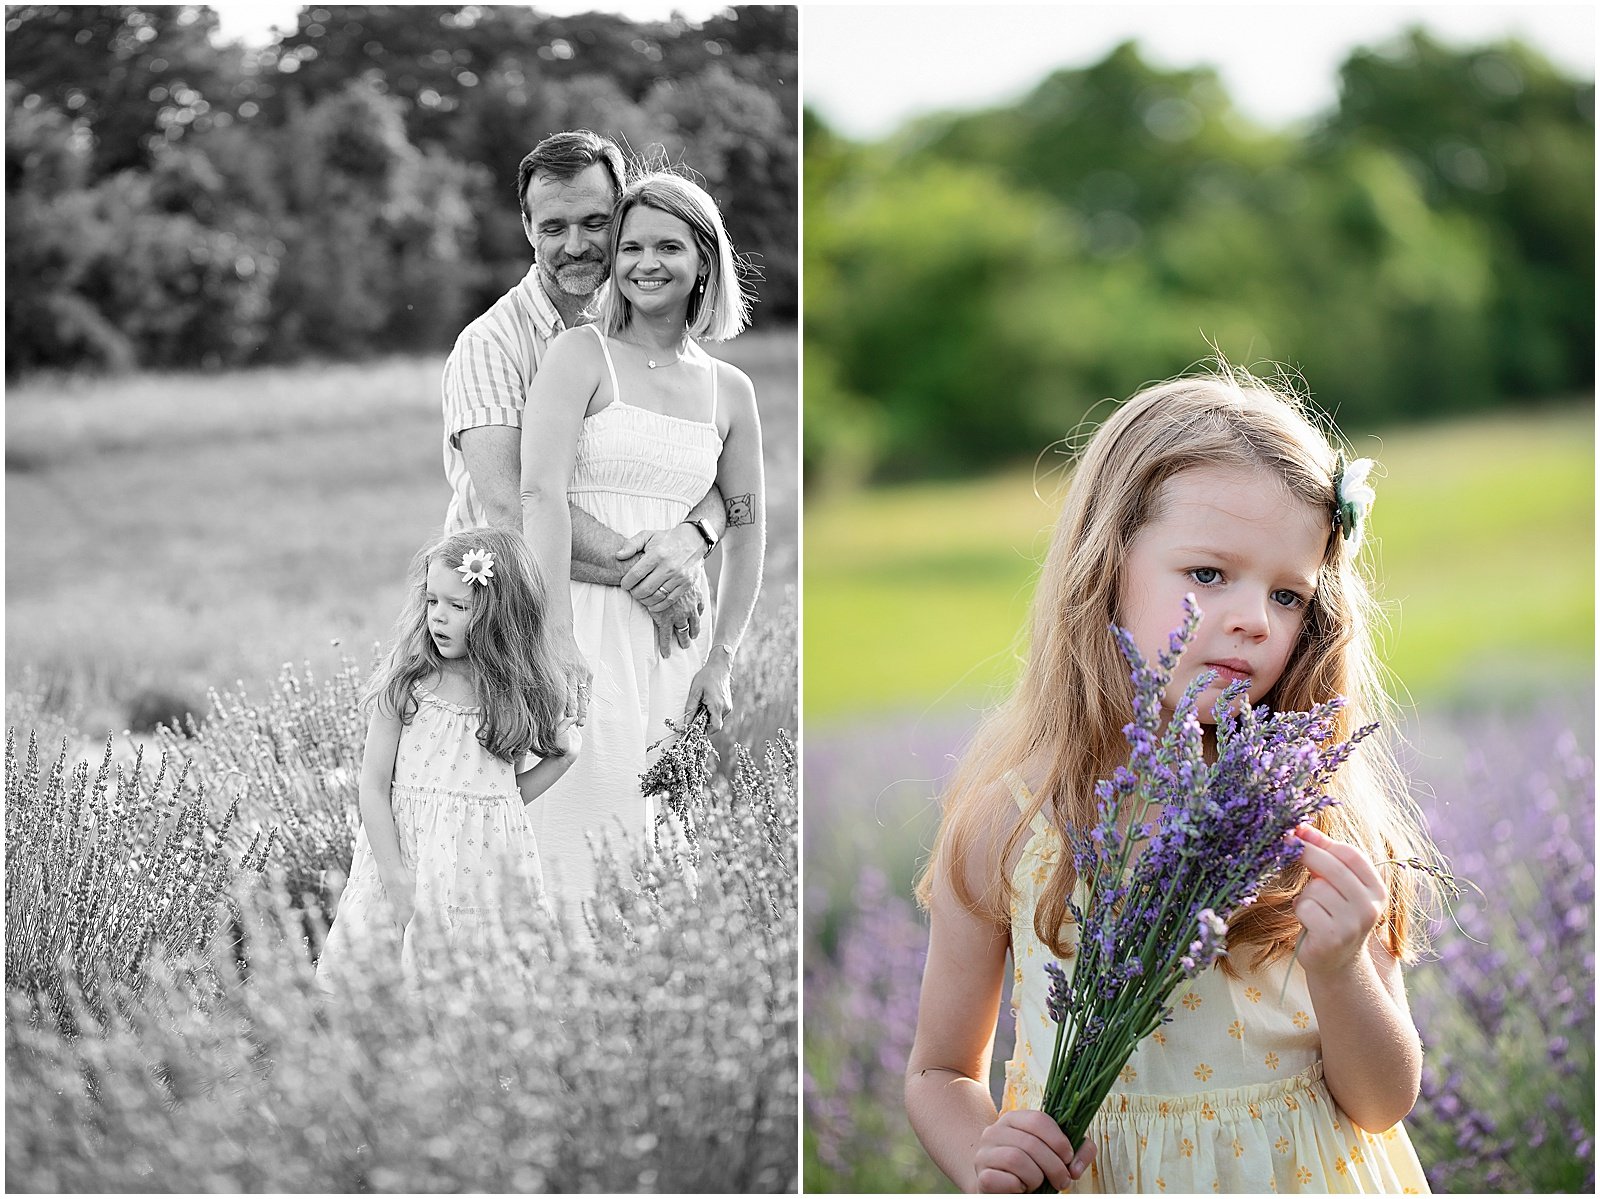 A Nashville family of three at the lavender fields, summer photographs